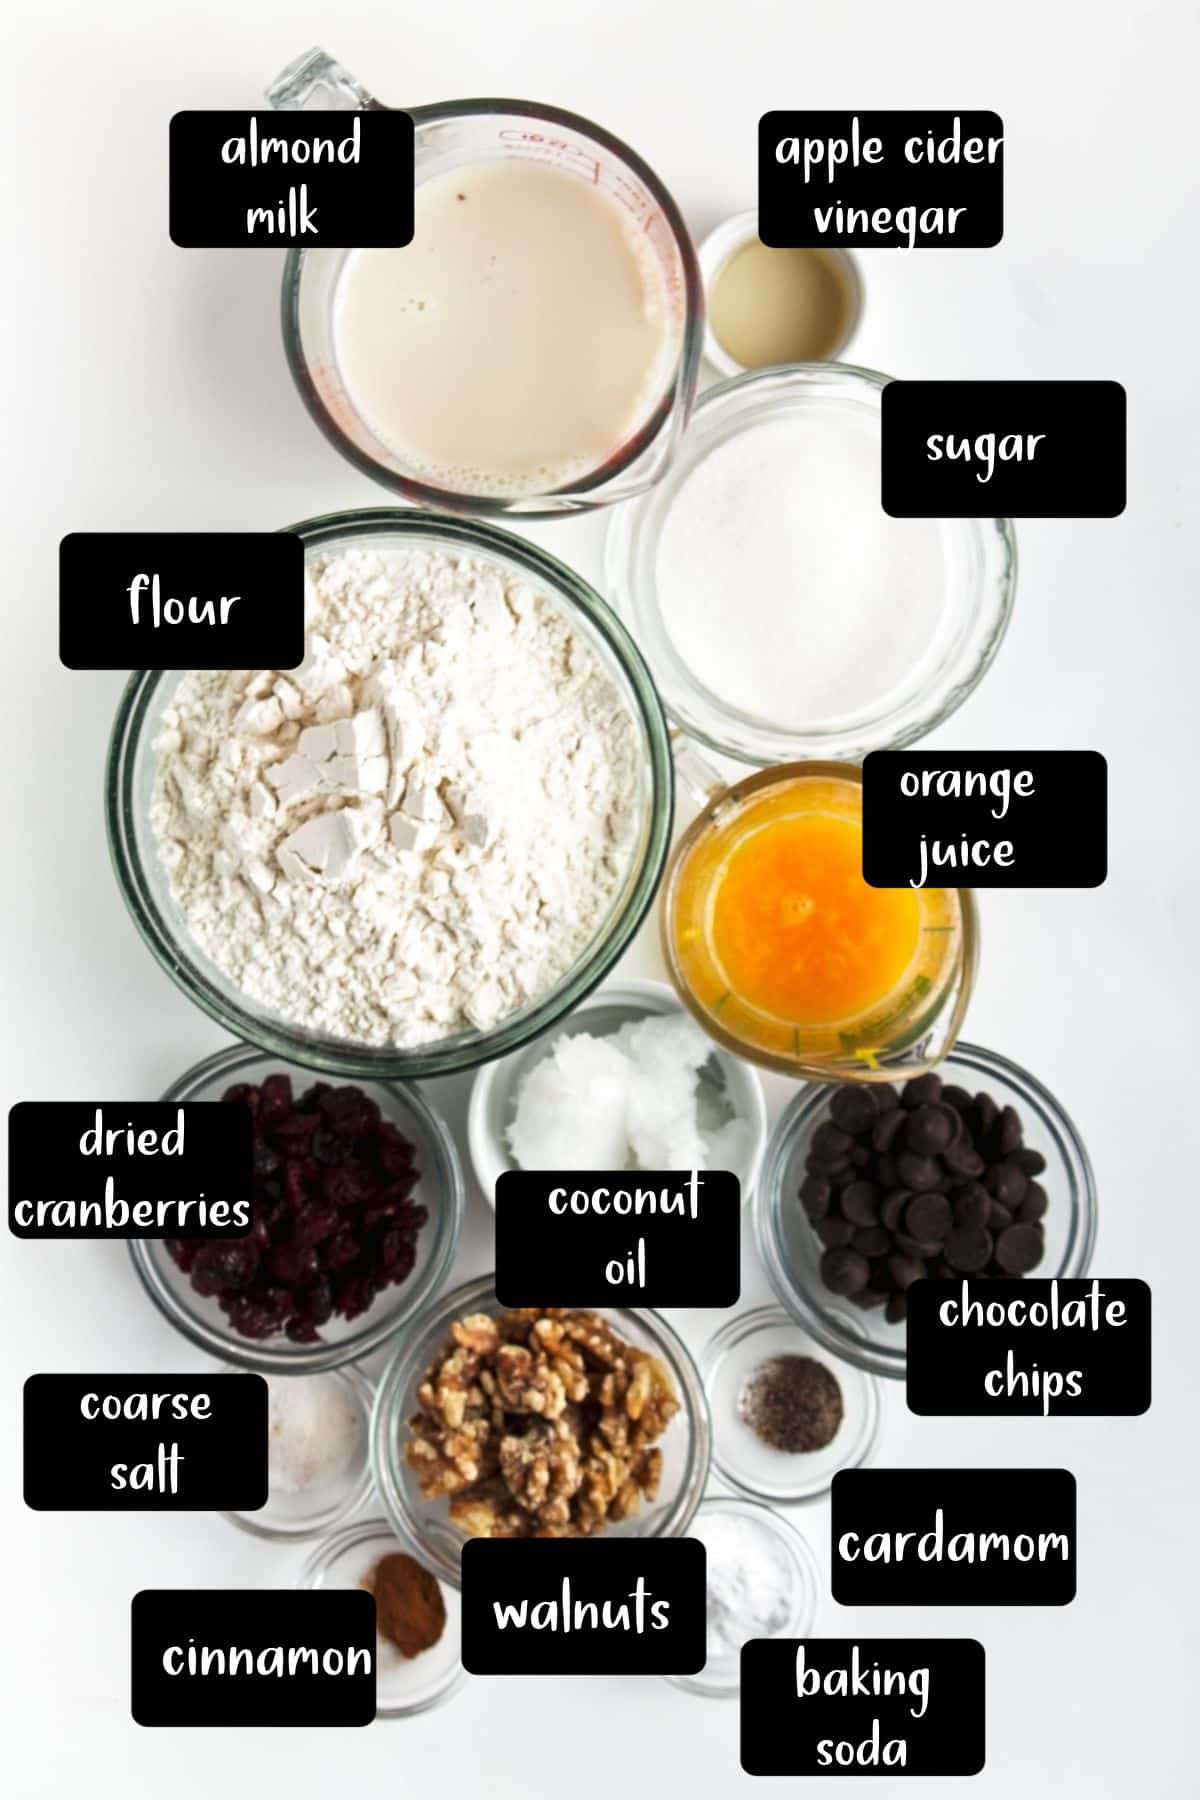 Labeled ingredients for cranberry walnut bread recipe.